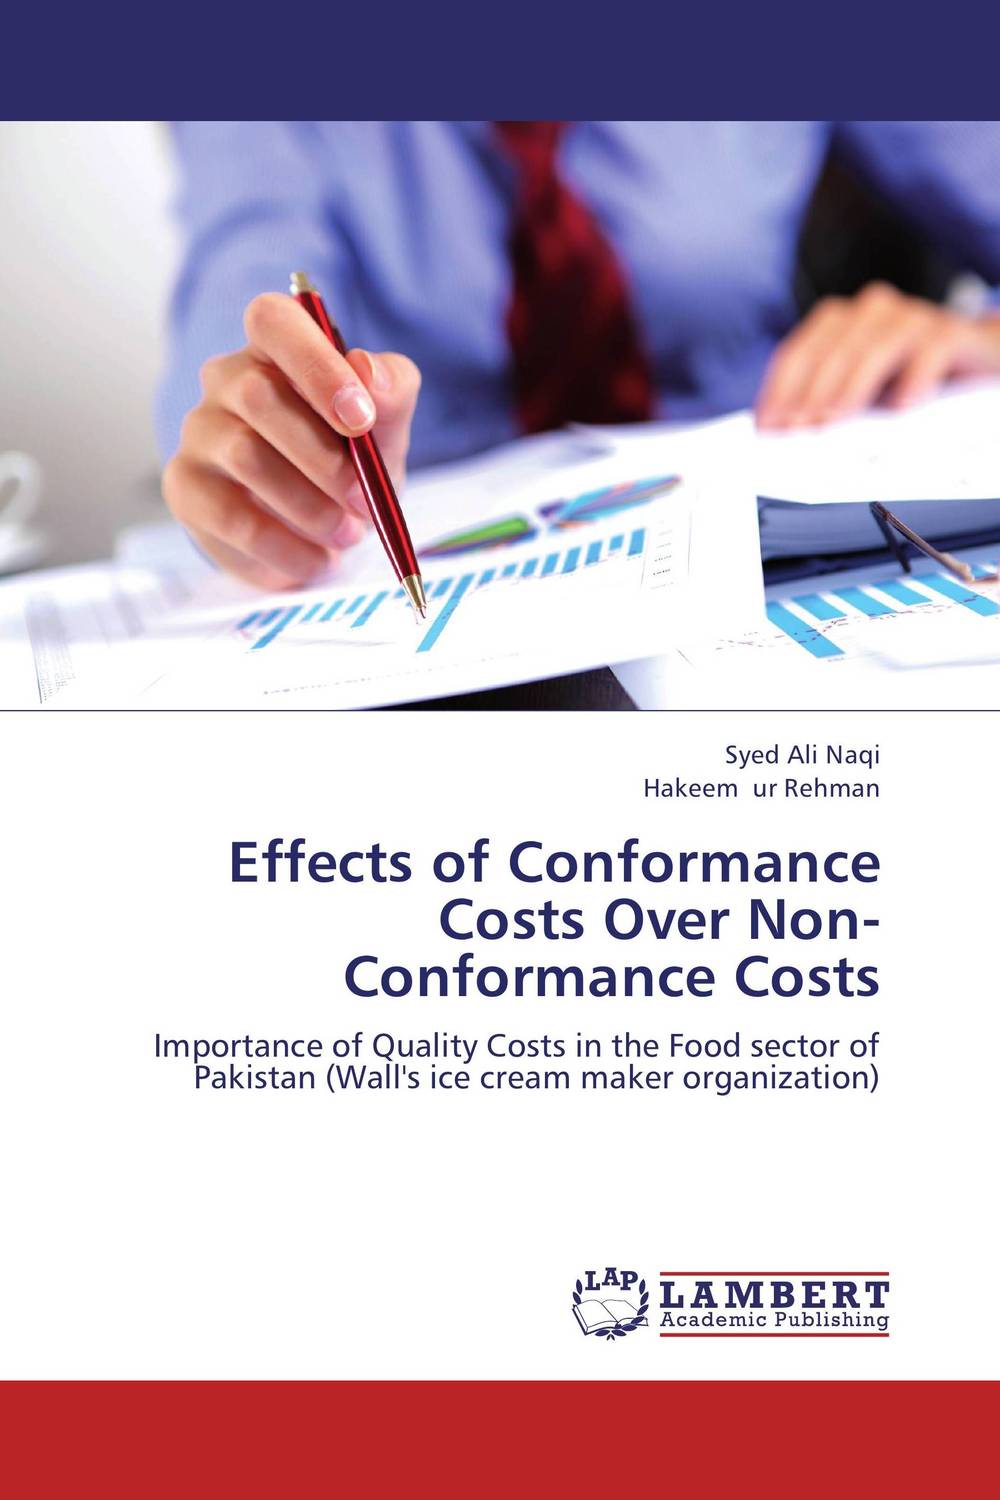 Effects of Conformance Costs Over Non-Conformance Costs